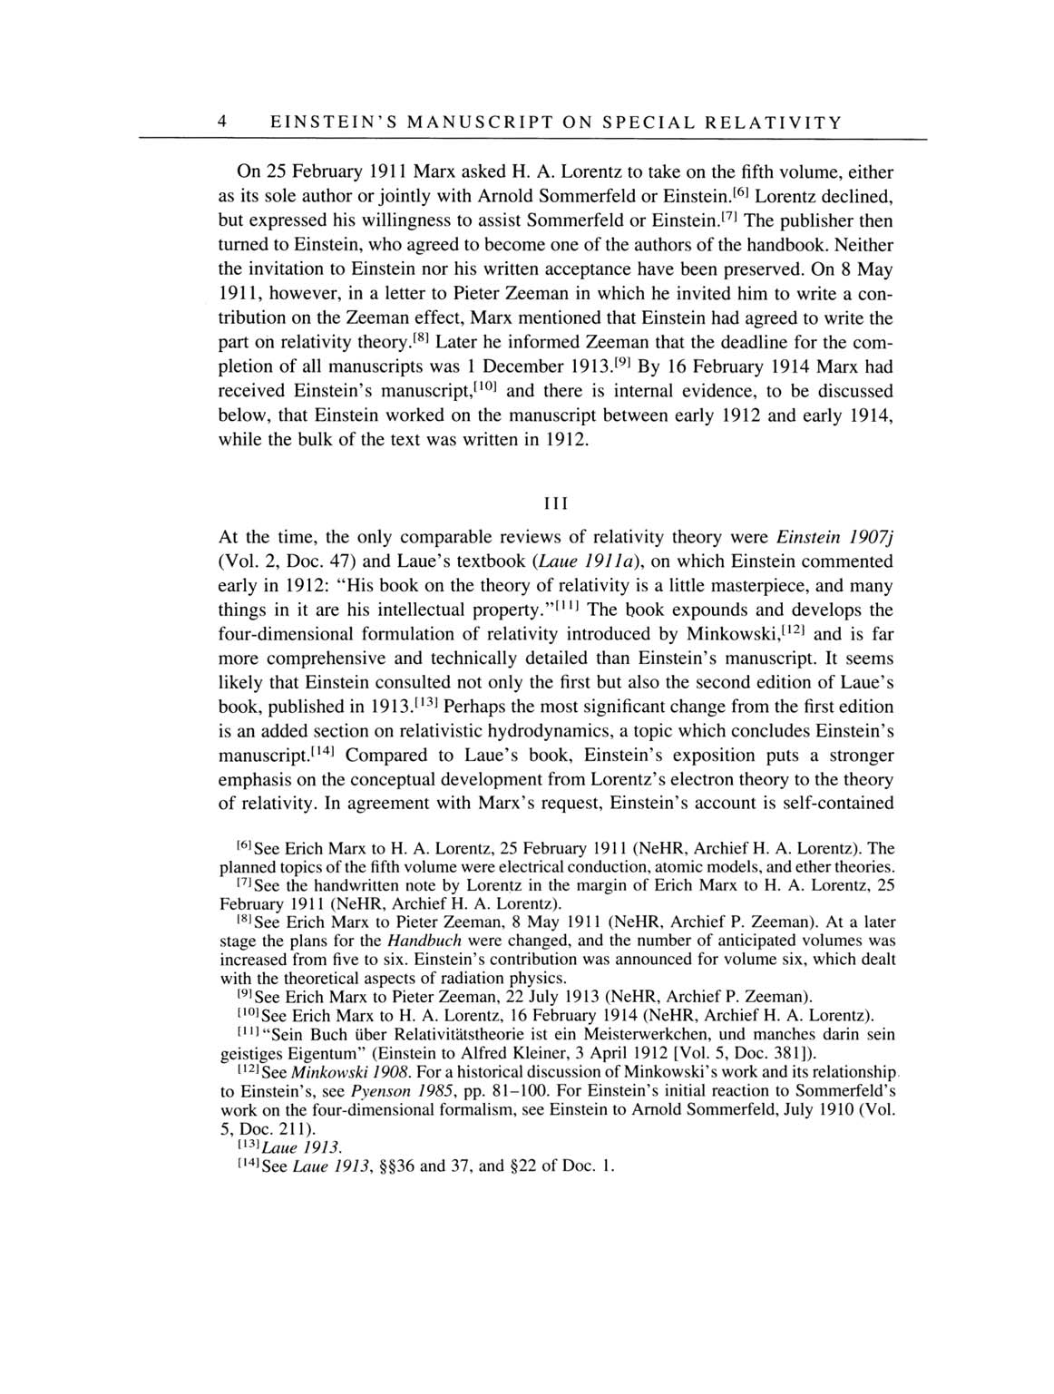 Volume 4: The Swiss Years: Writings 1912-1914 page 4